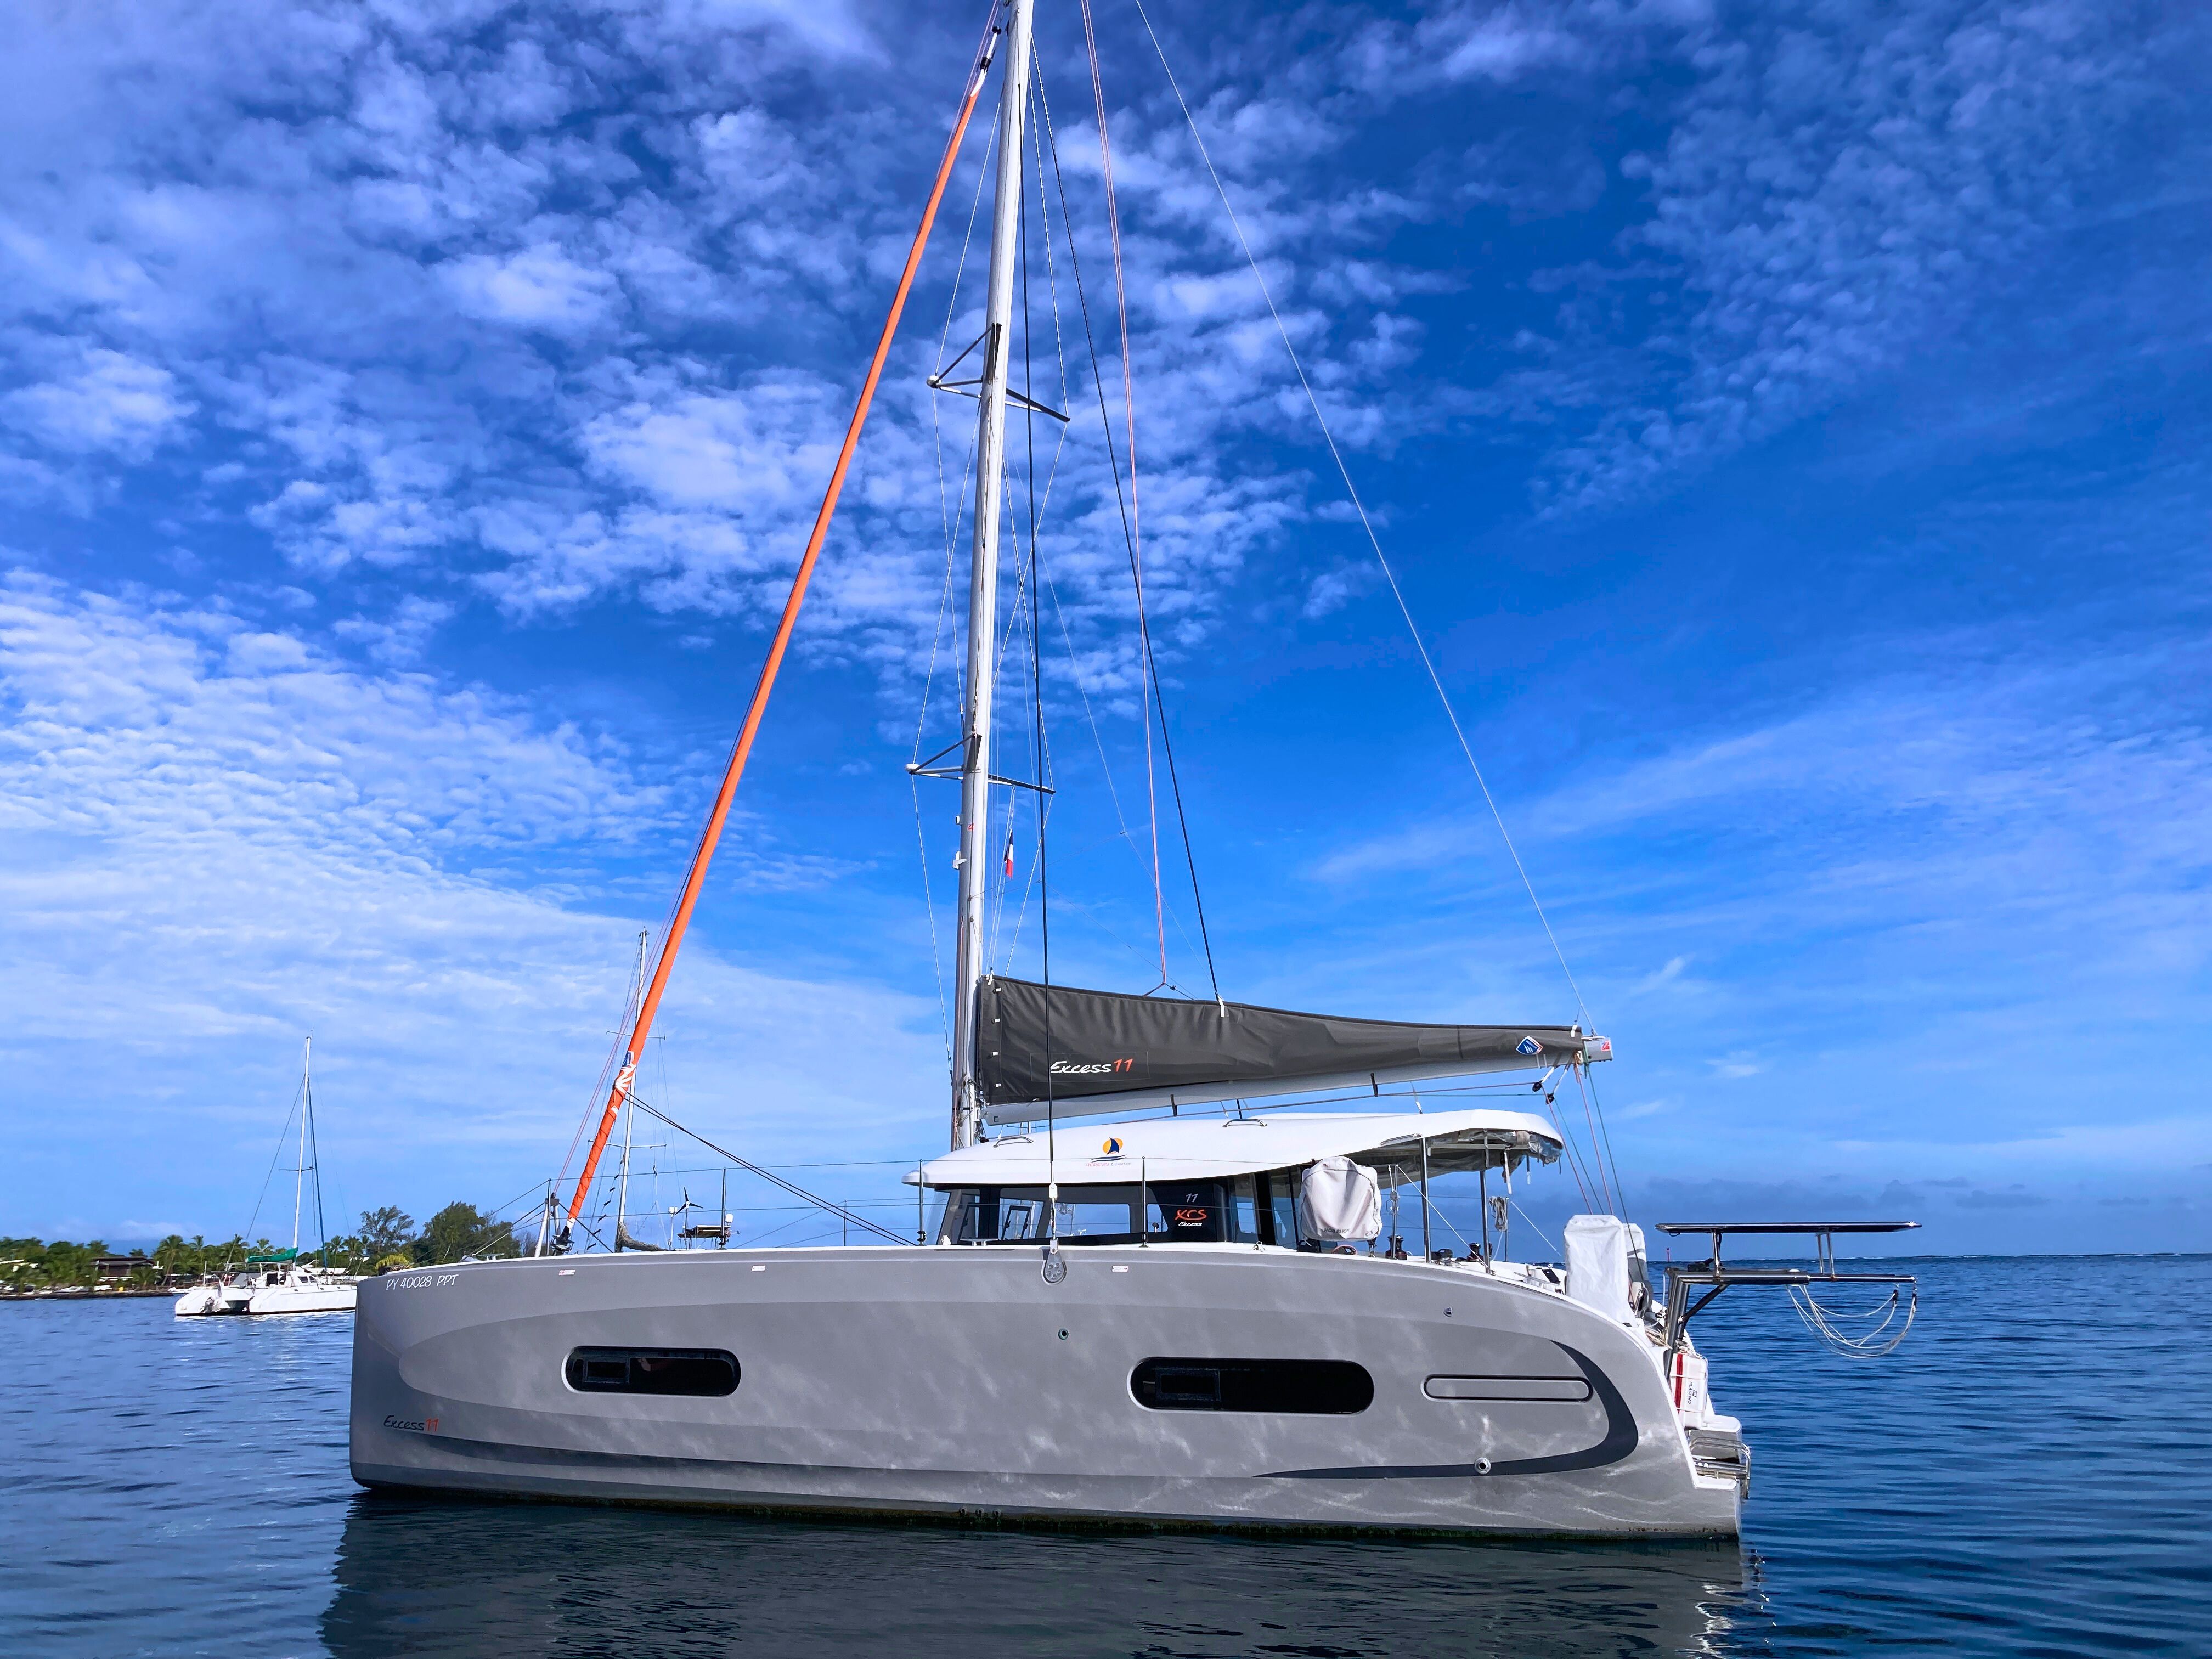 Excess 11 - Yacht Charter Tahiti & Boat hire in French Polynesia Society Islands Tahiti Papeete Papeete 2